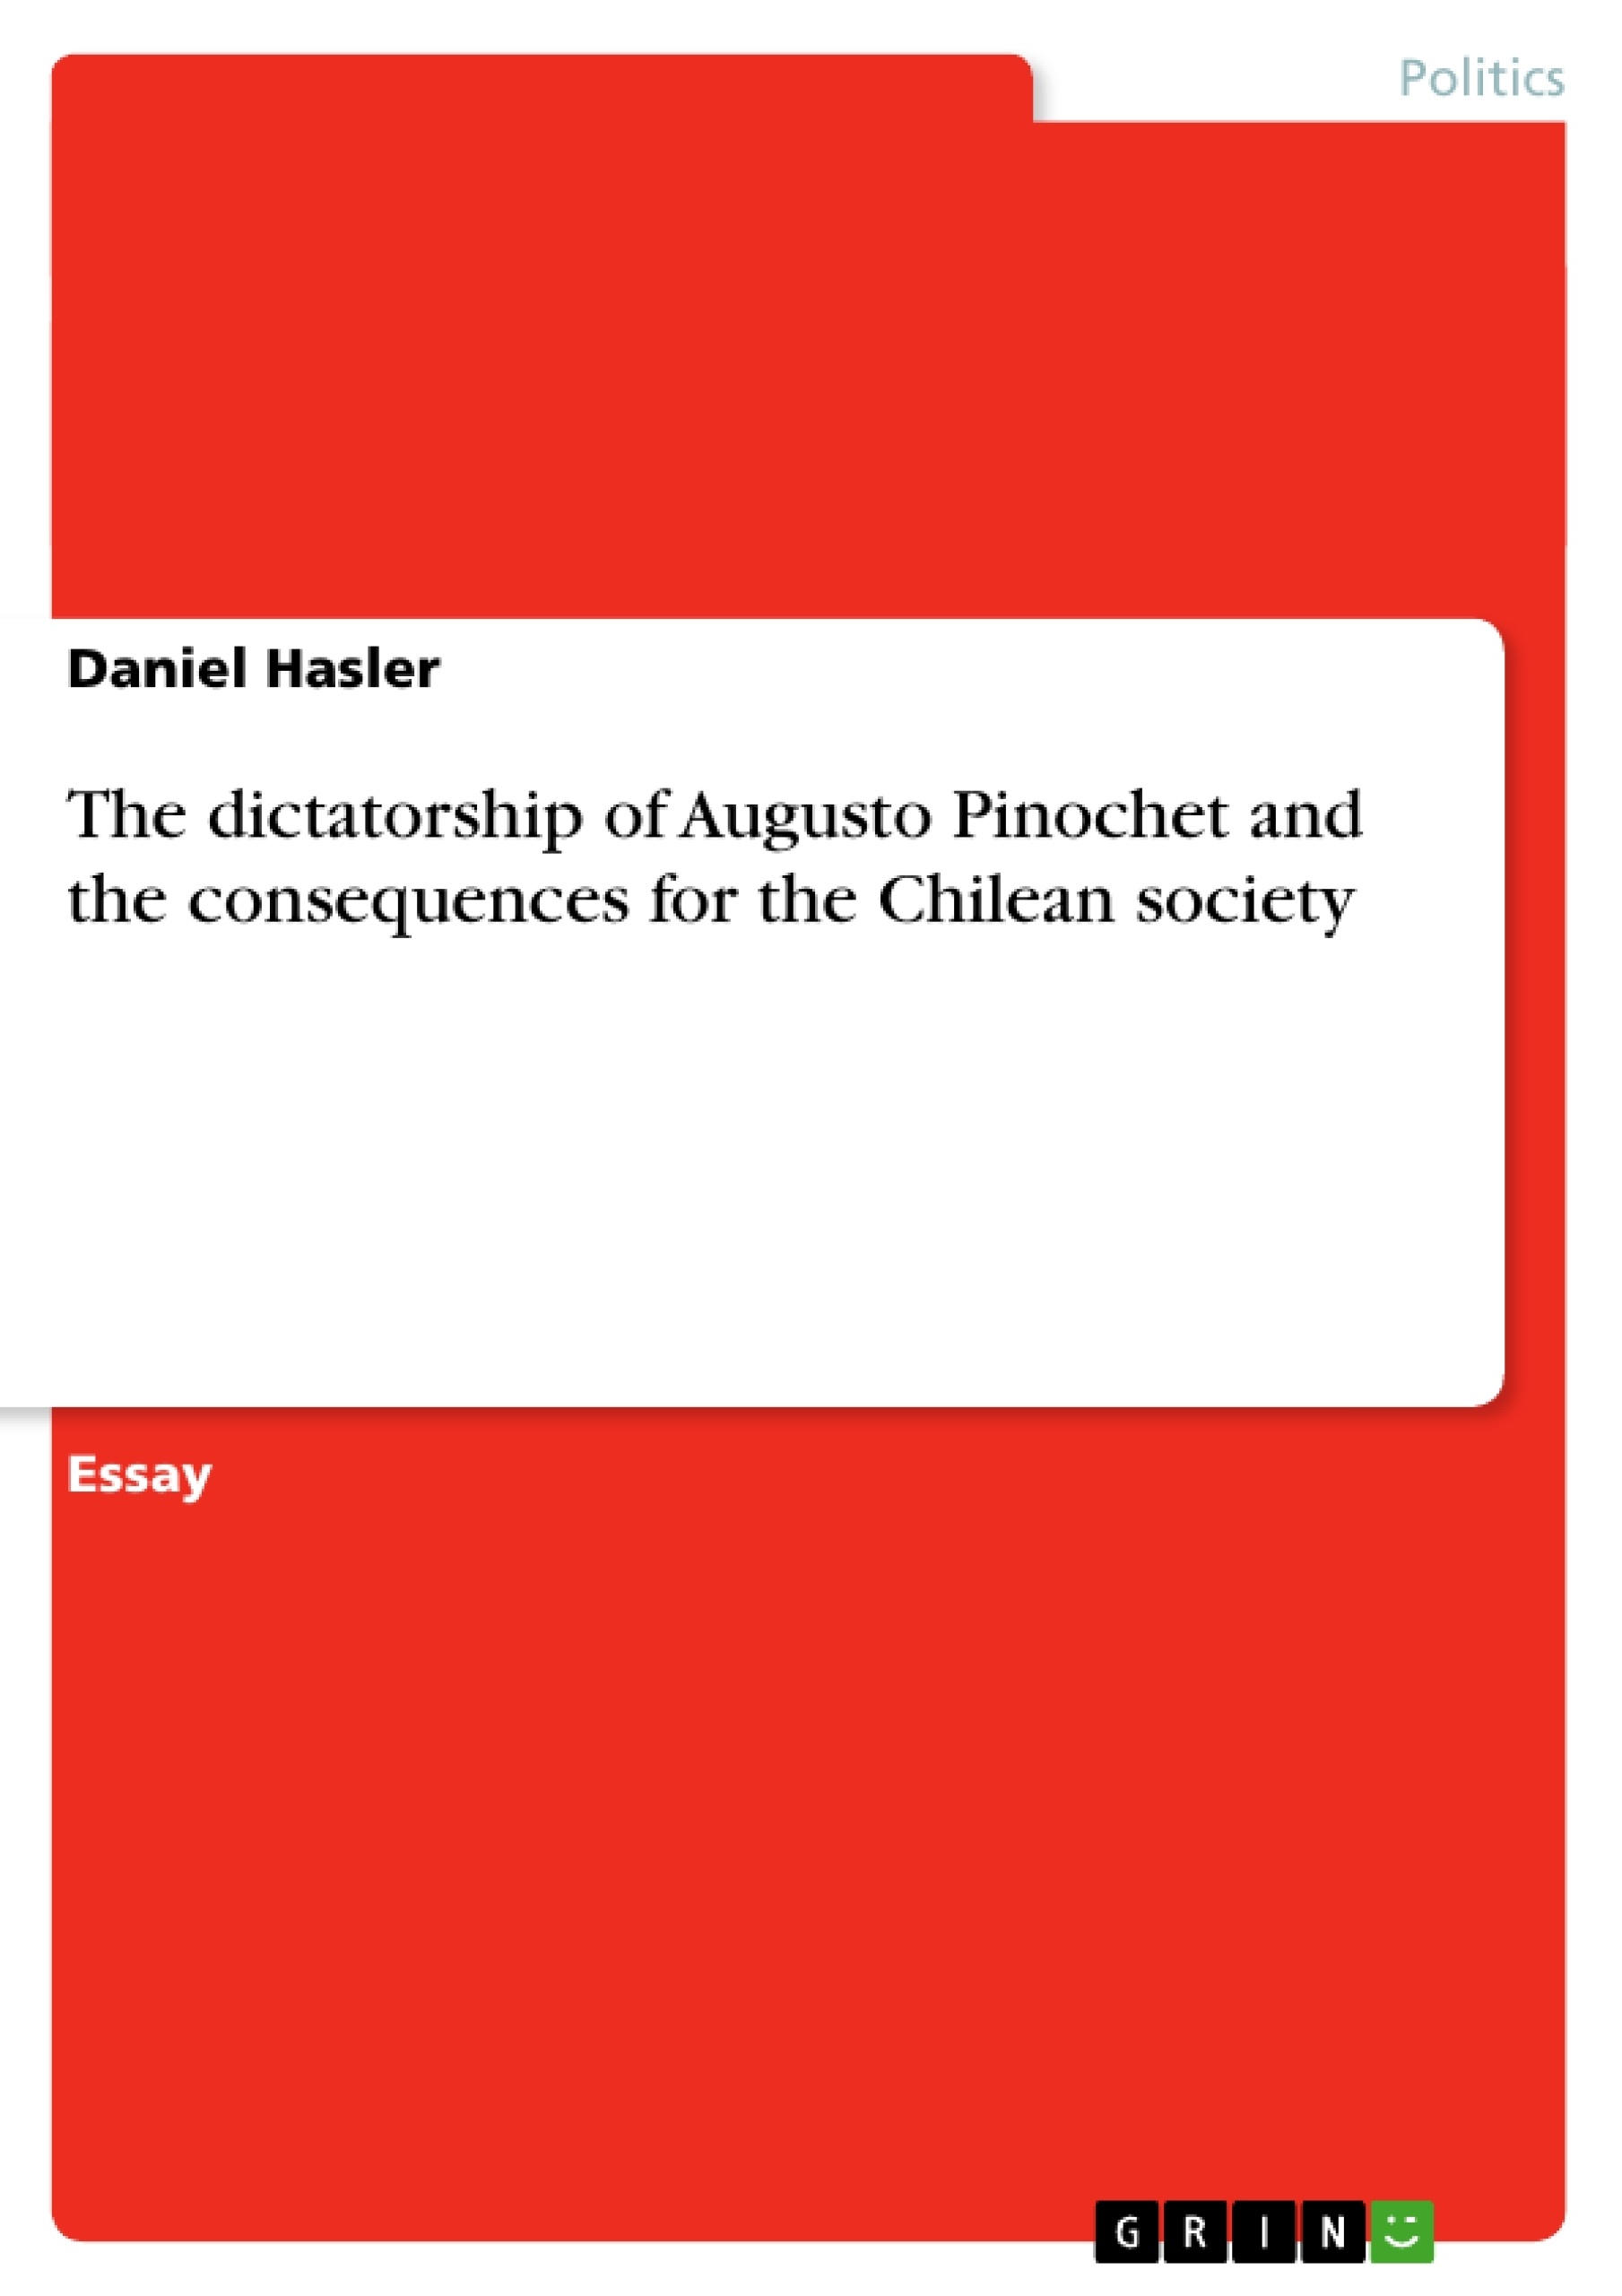 Título: The dictatorship of Augusto Pinochet and the consequences for the Chilean society